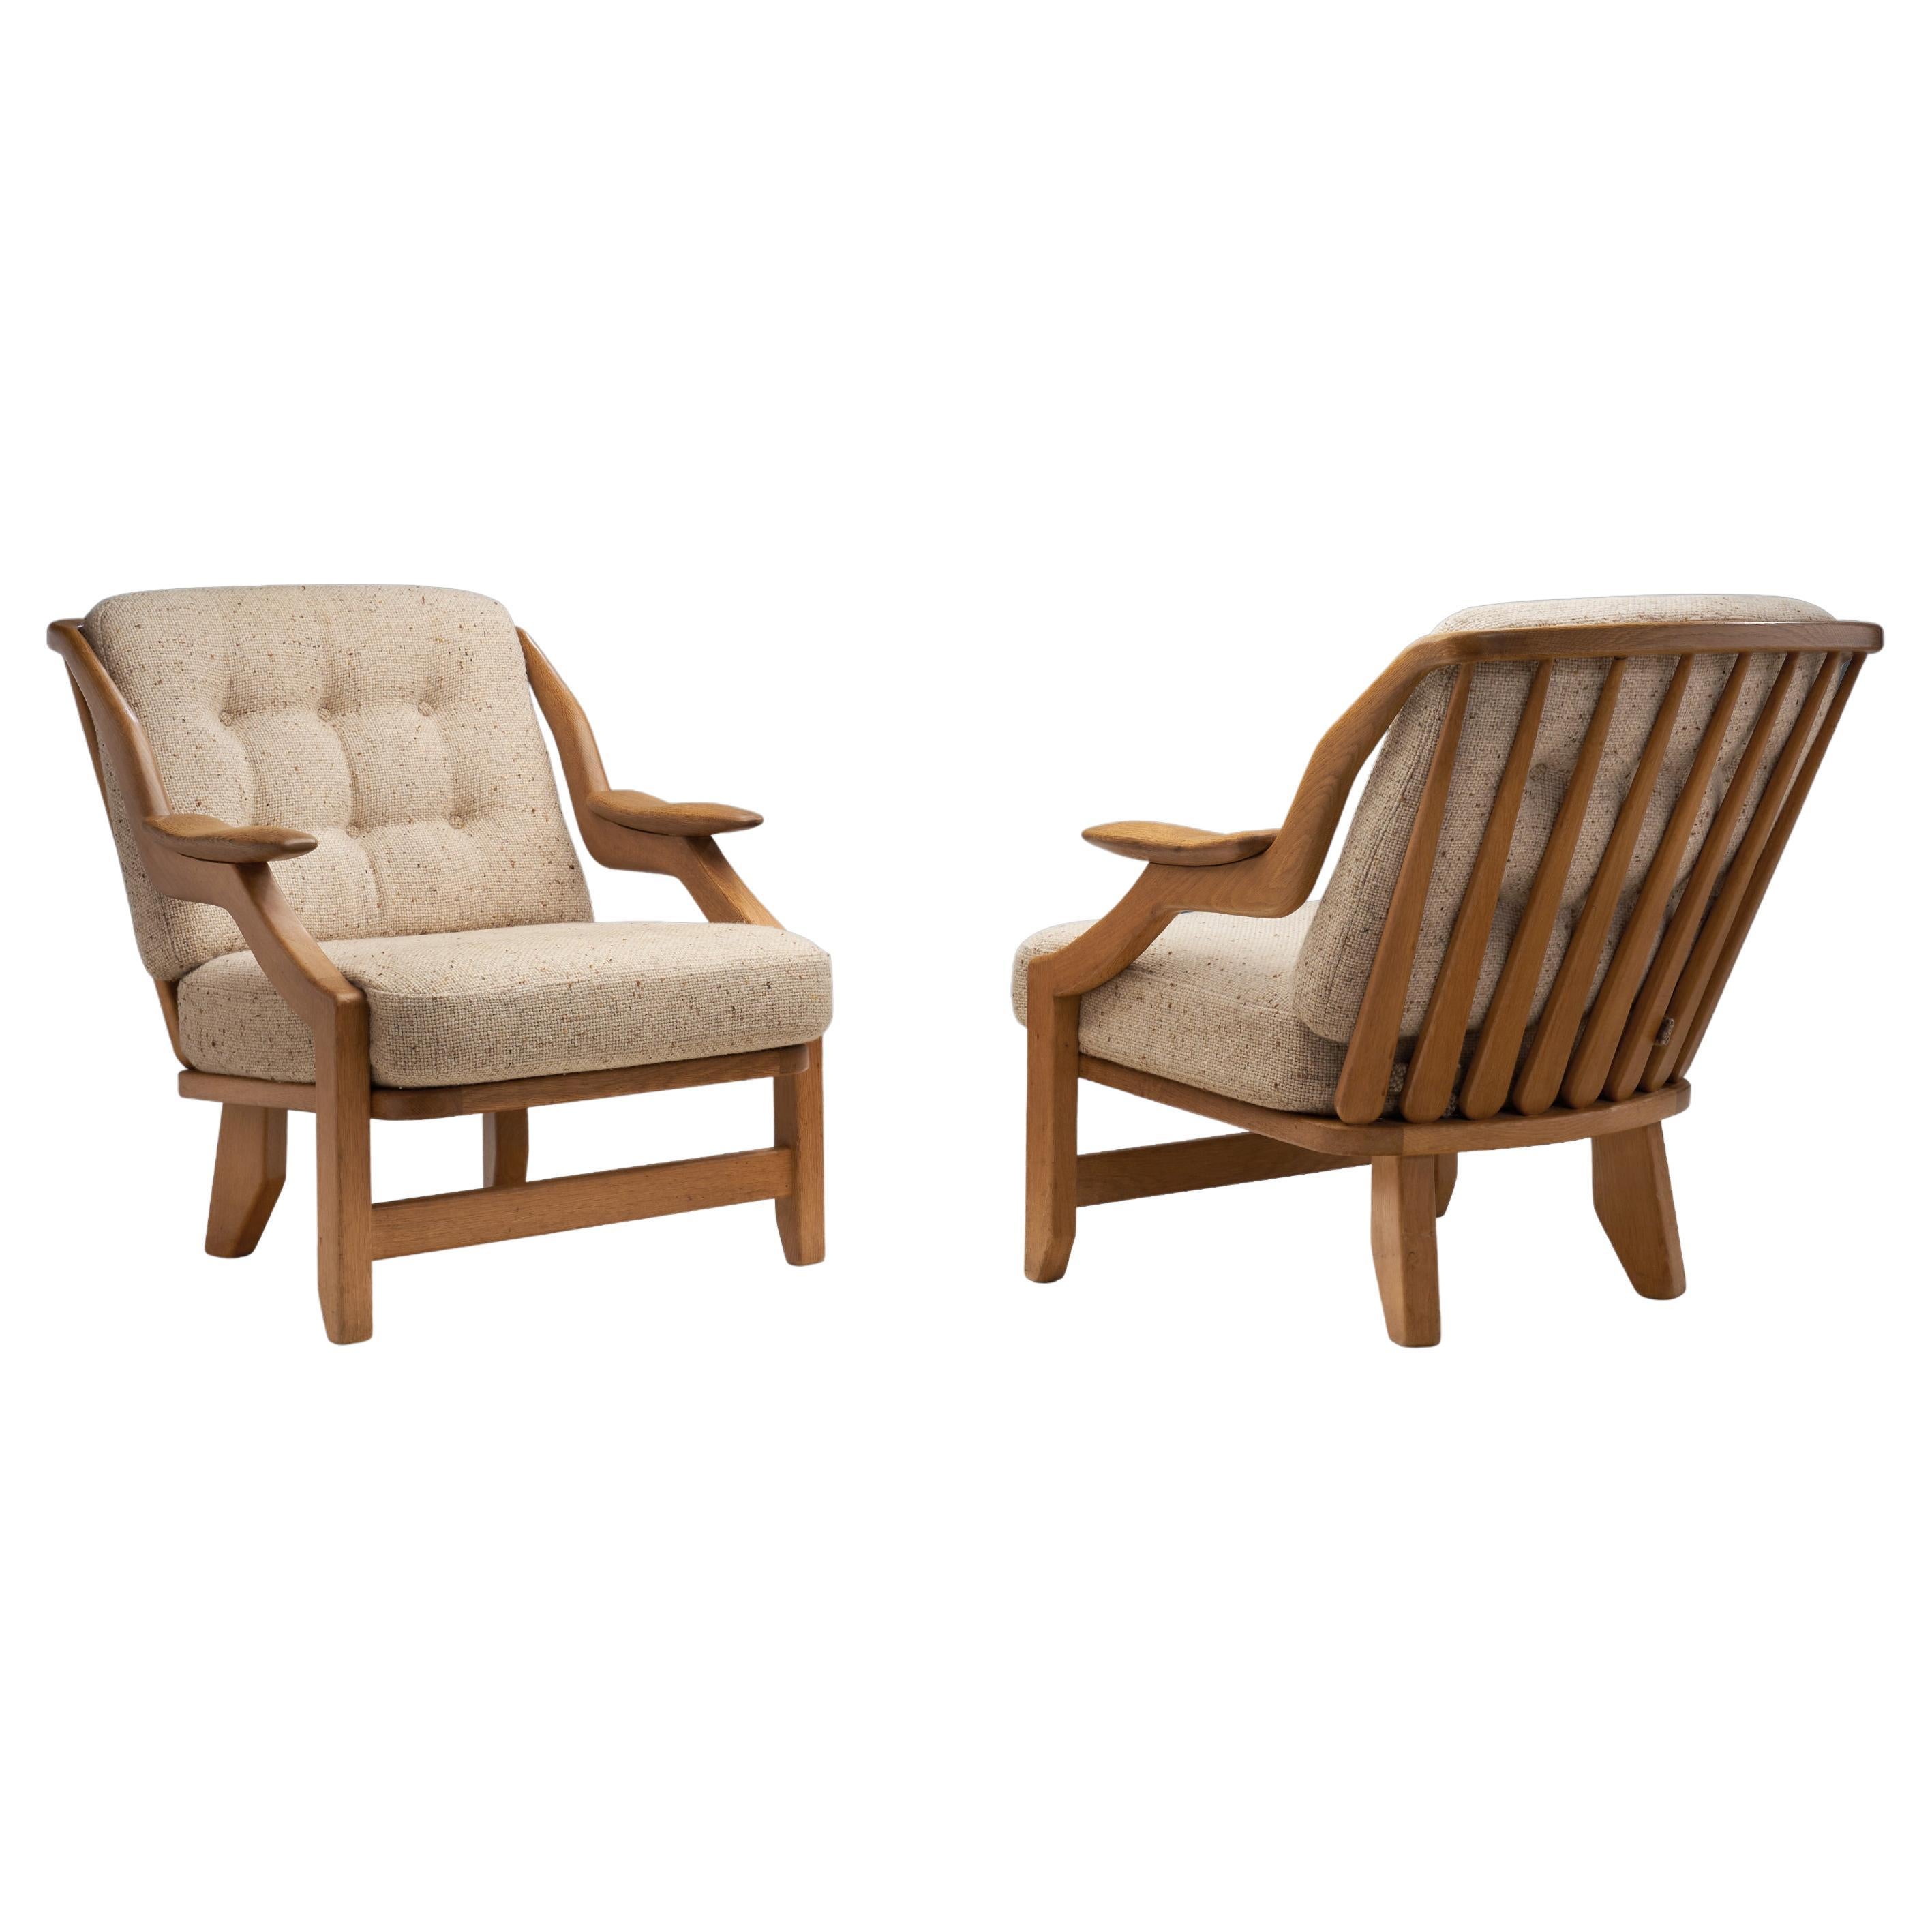 Pair of “Grégoire” Lounge Chairs by Guillerme et Chambron, France 1960s